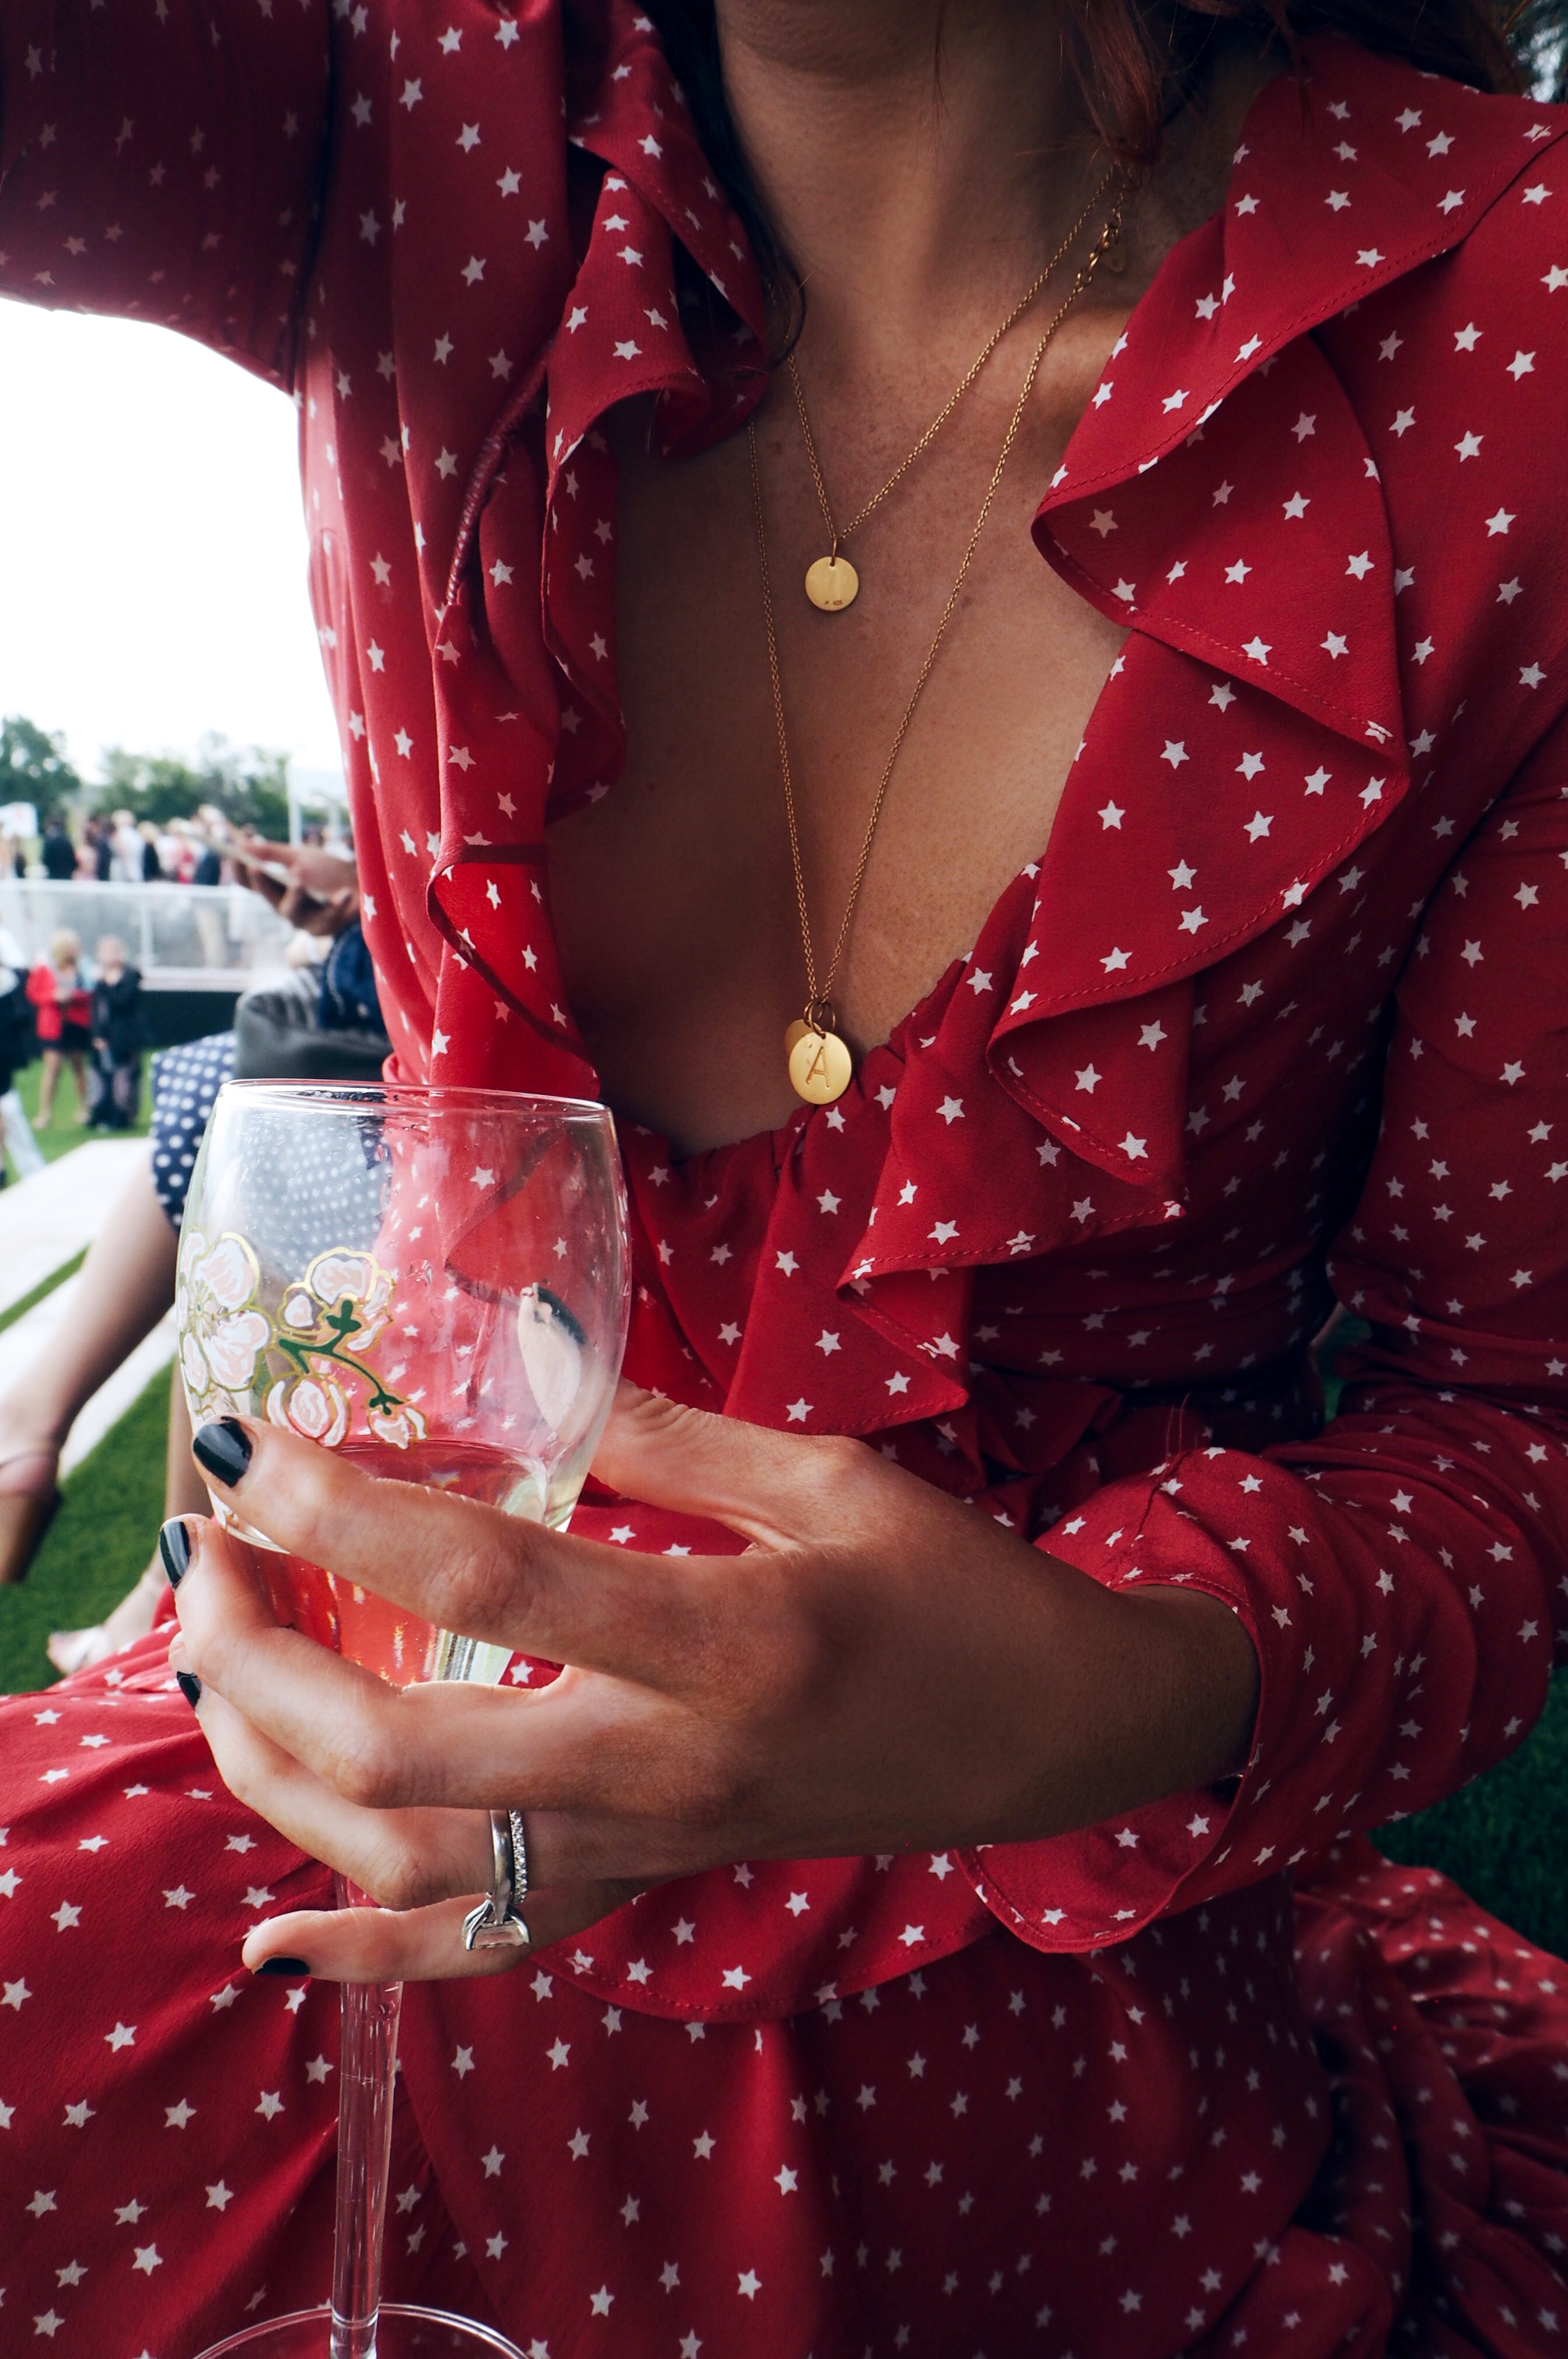 royal-salute-polo-match-perrier-jouet